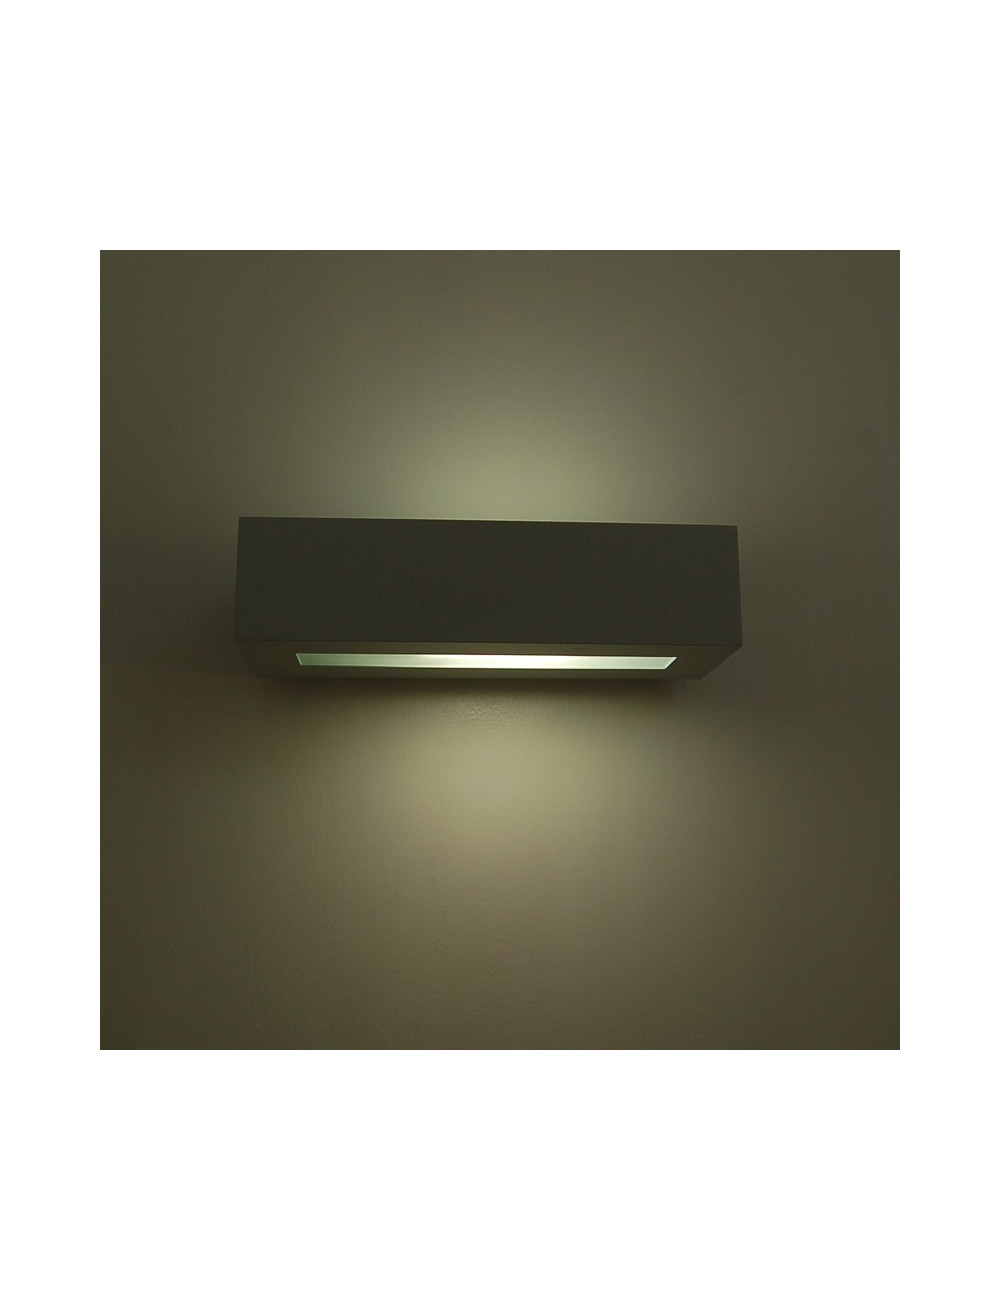 BRICK Spotlight Technical Modern Wall Lamp up & down Beam Birezionale from the Outside